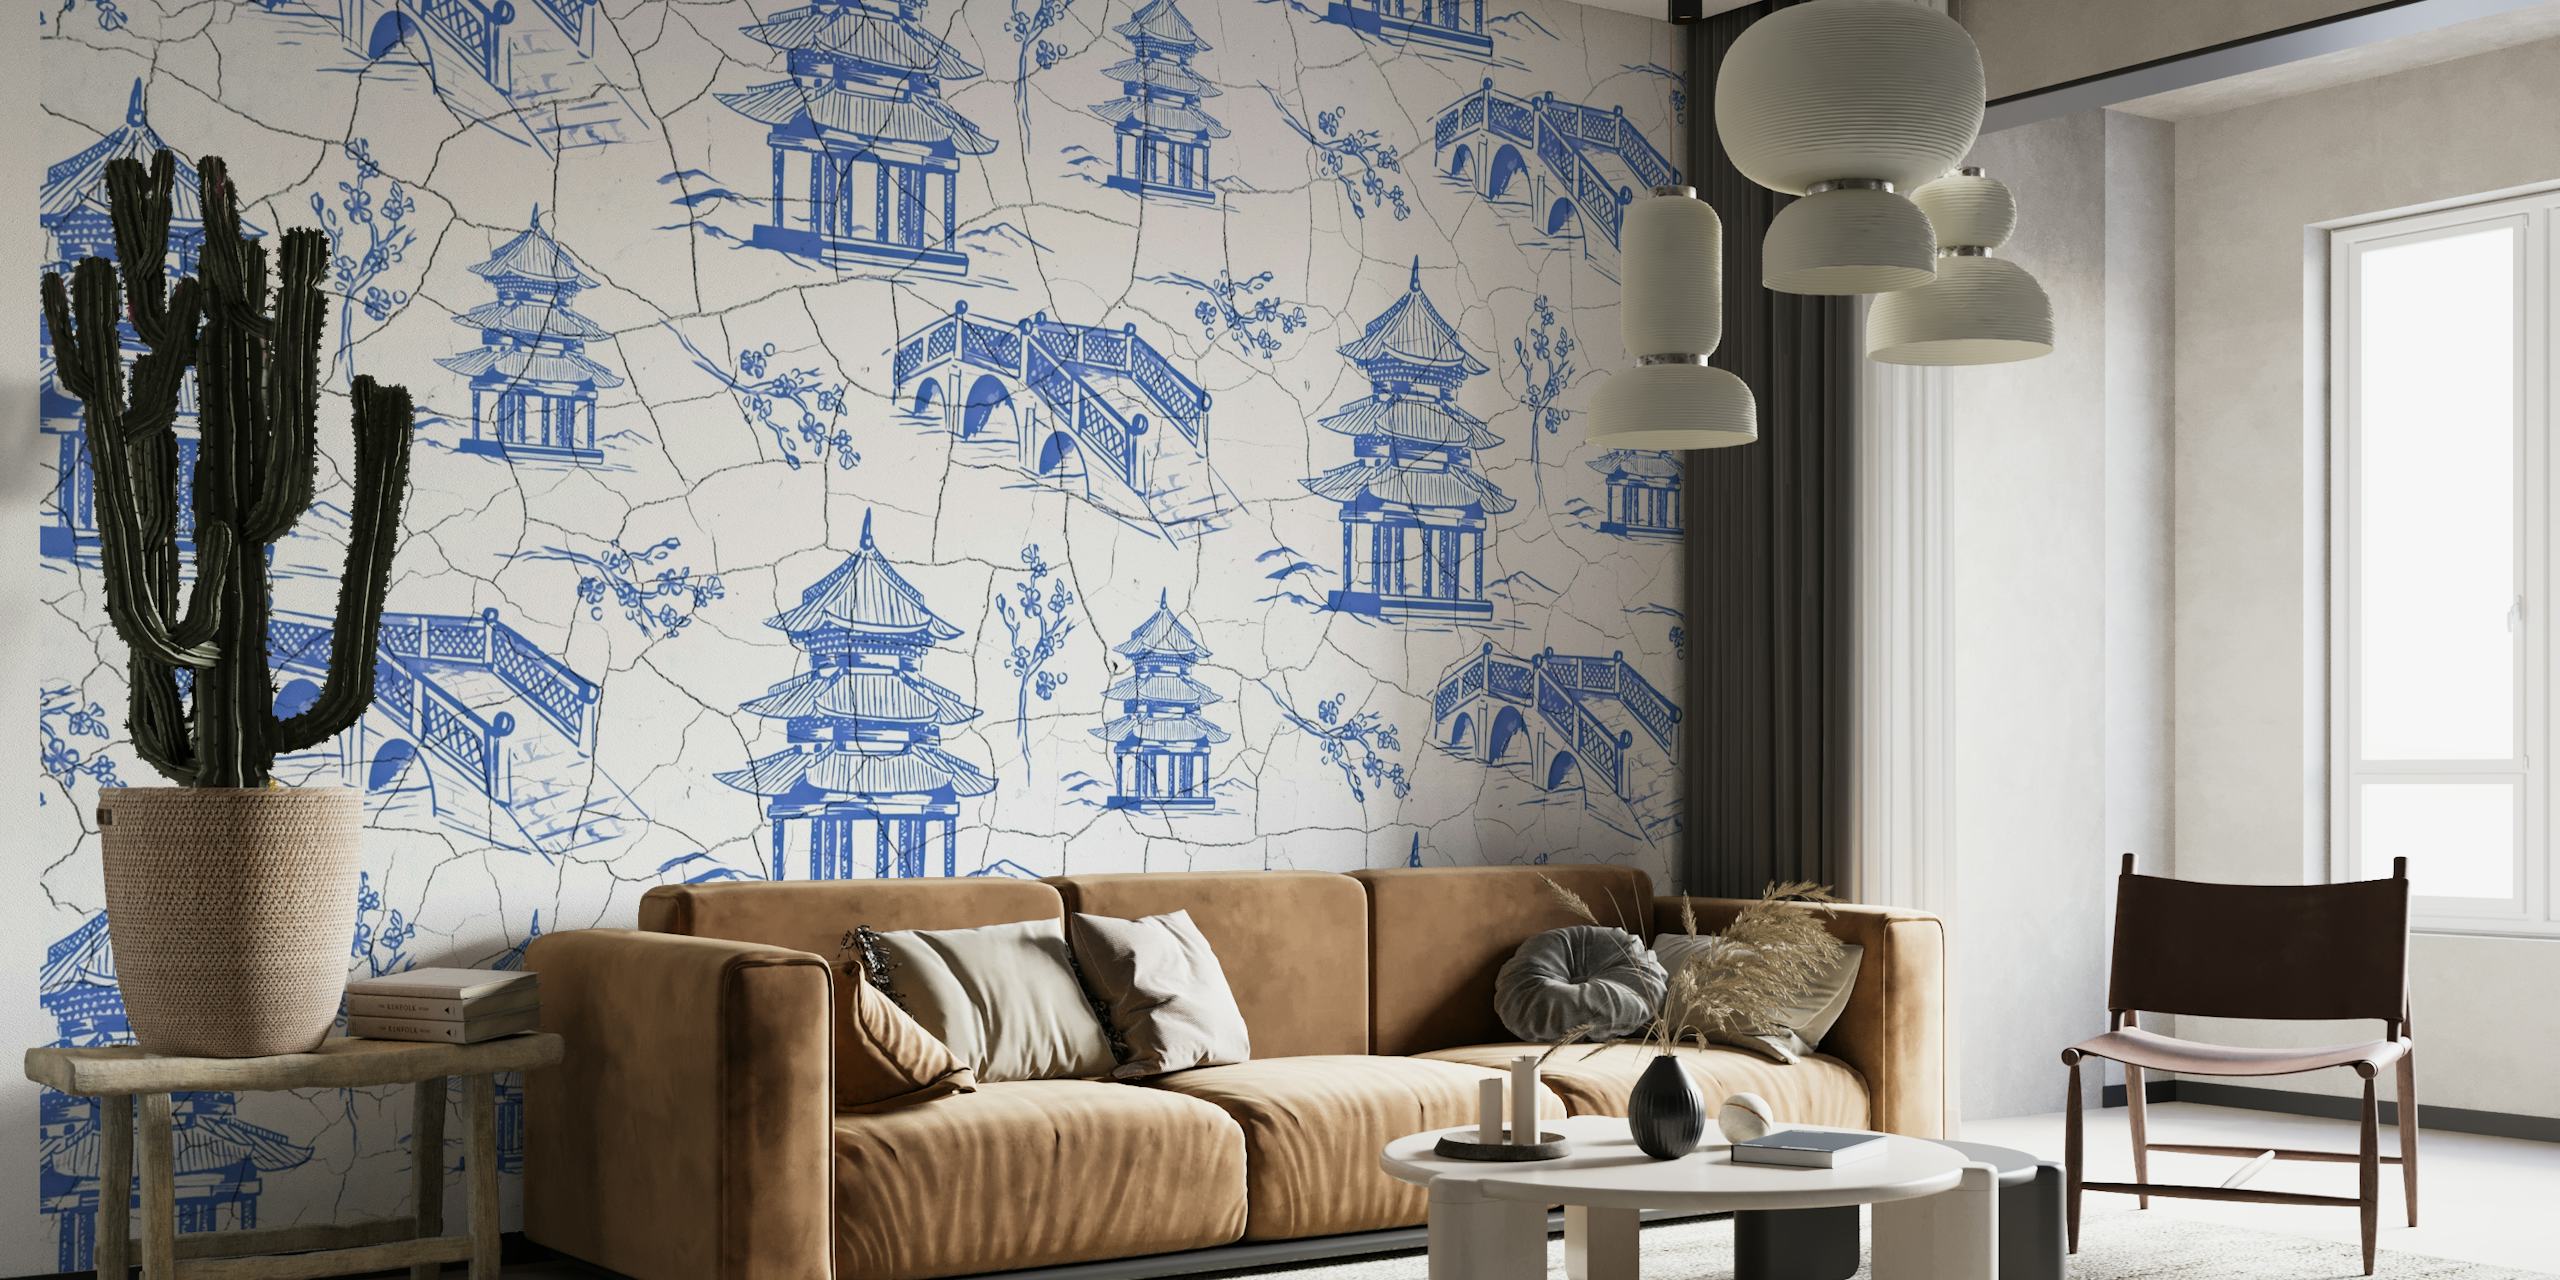 Blue and white wall mural depicting traditional Japanese architecture and nature patterns